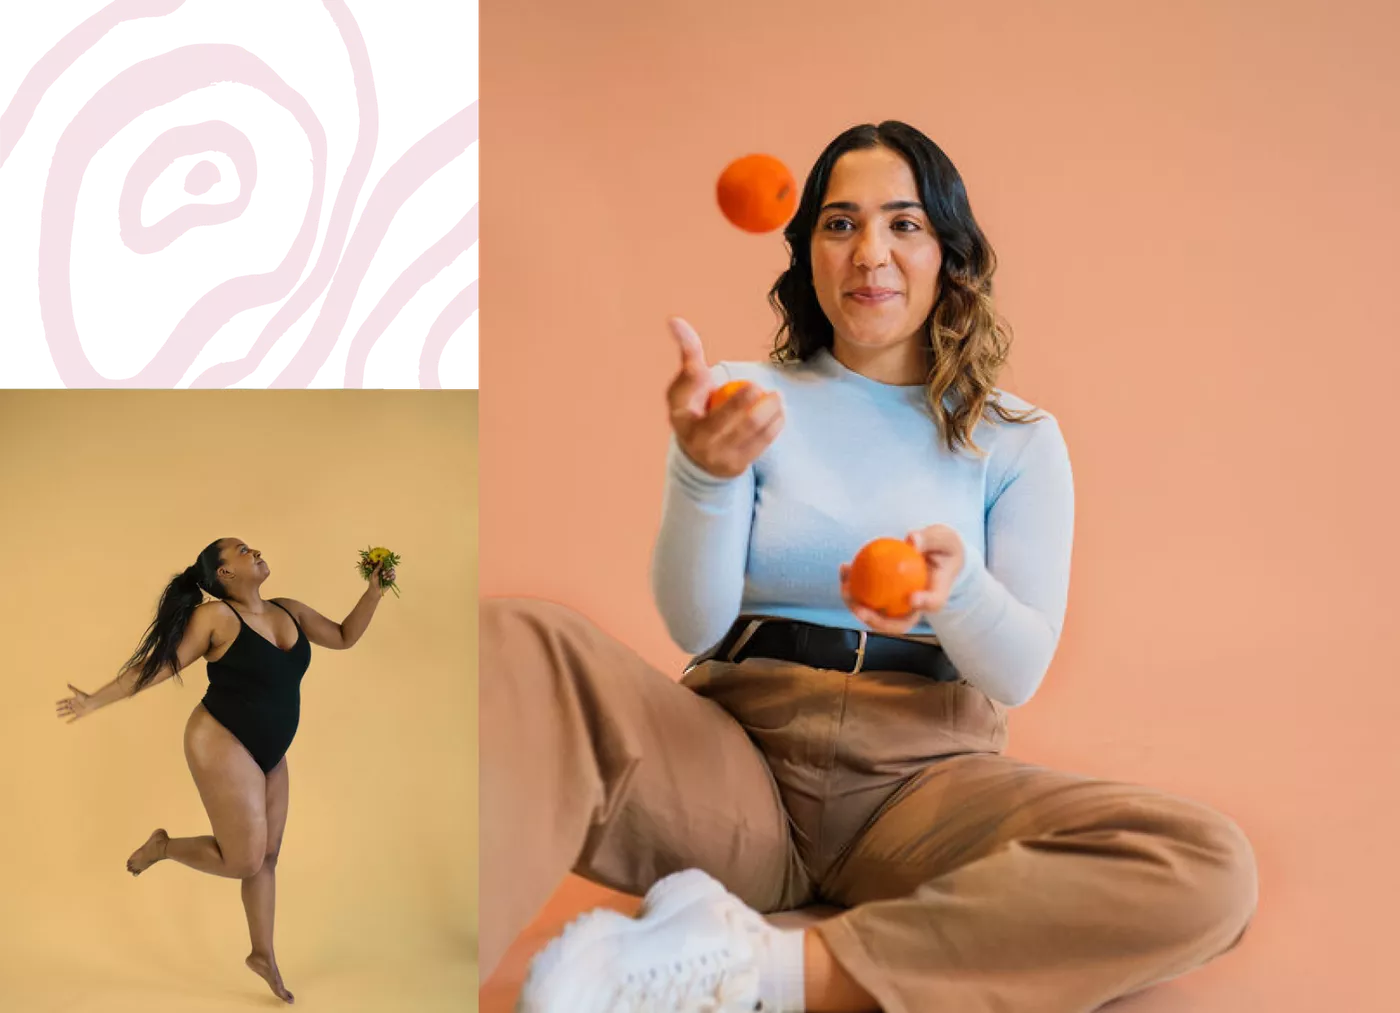 woman jumping and woman with oranges